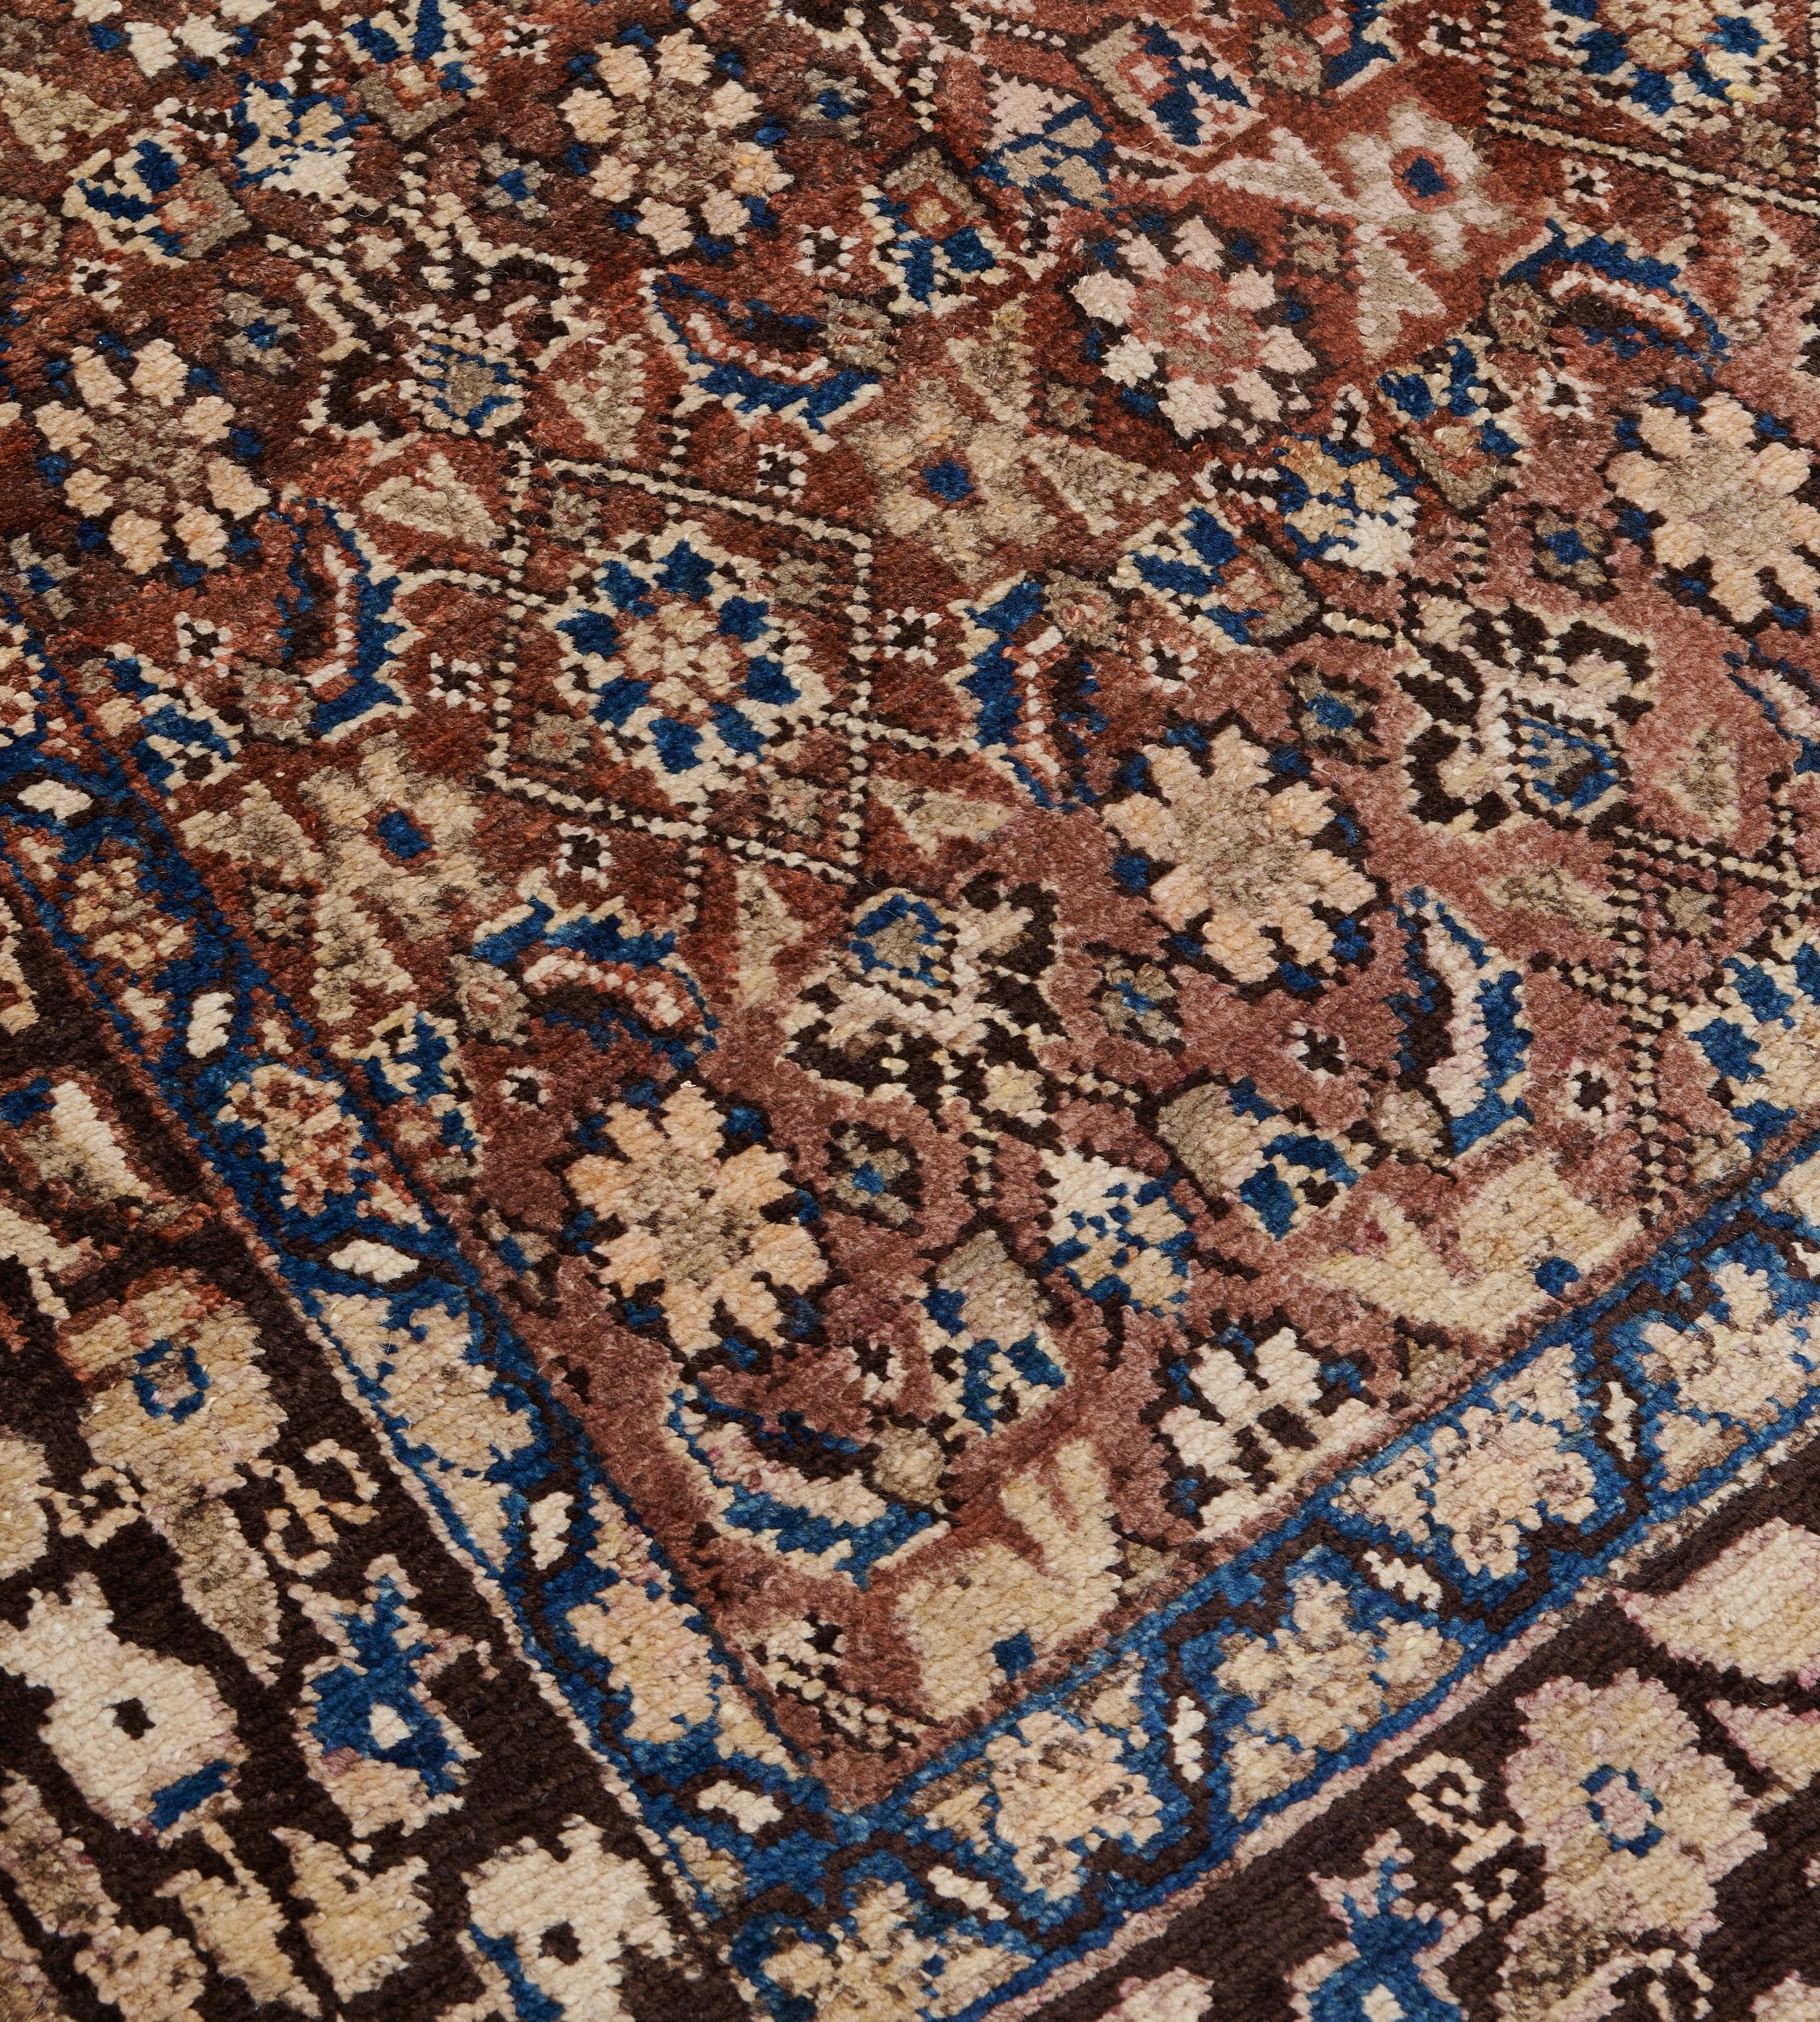 Traditional Antique Handwoven Persian Bidjar Rug In Good Condition For Sale In West Hollywood, CA